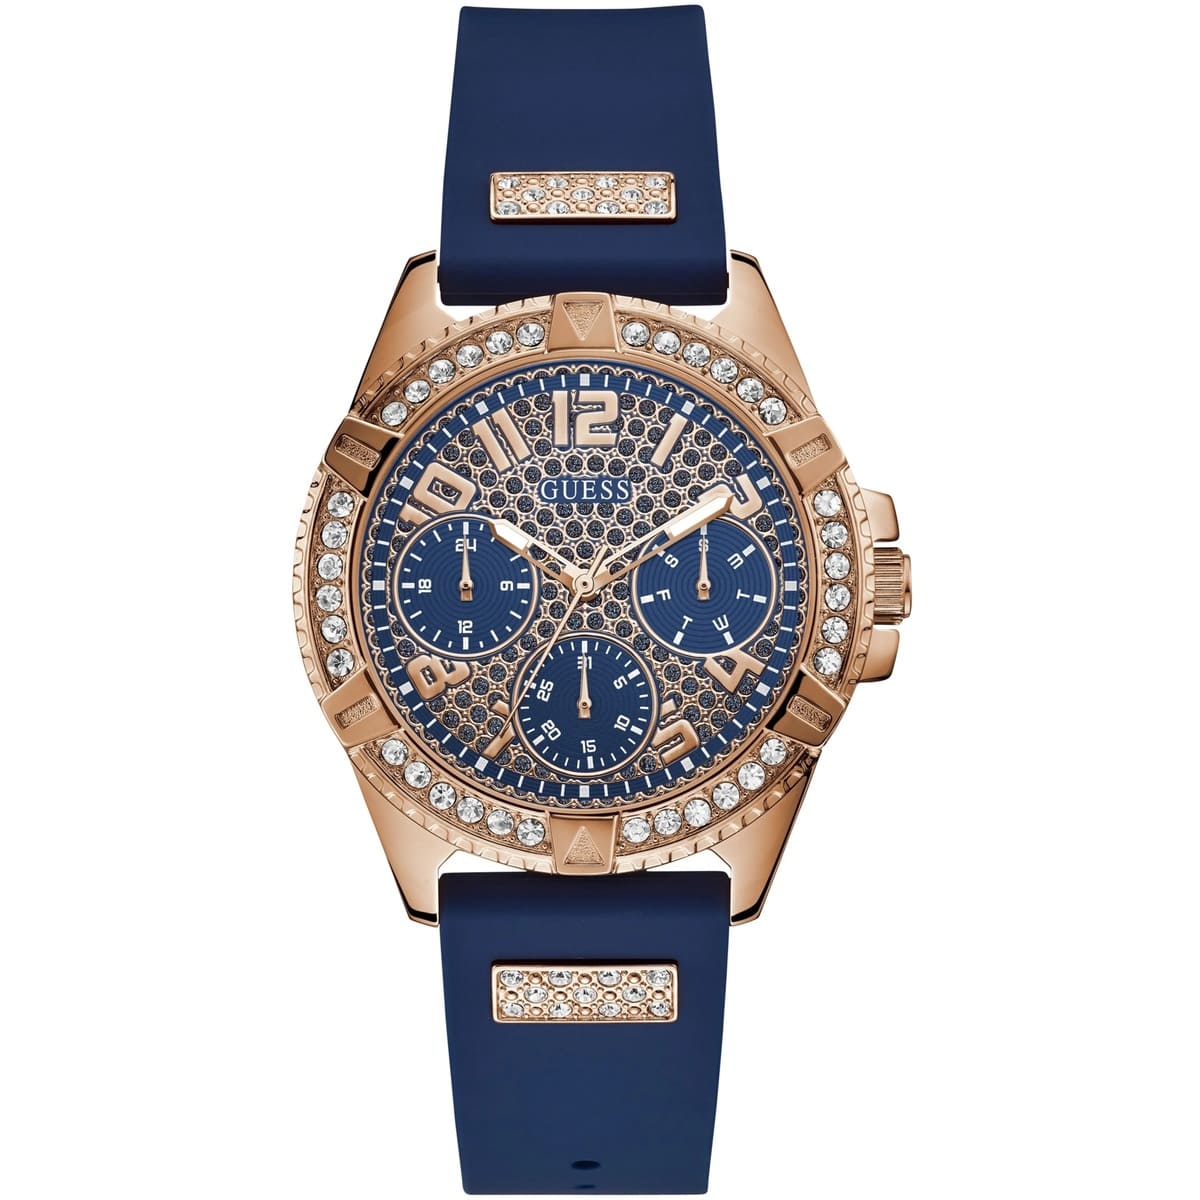 Guess women watch with blue dial with frame of stones